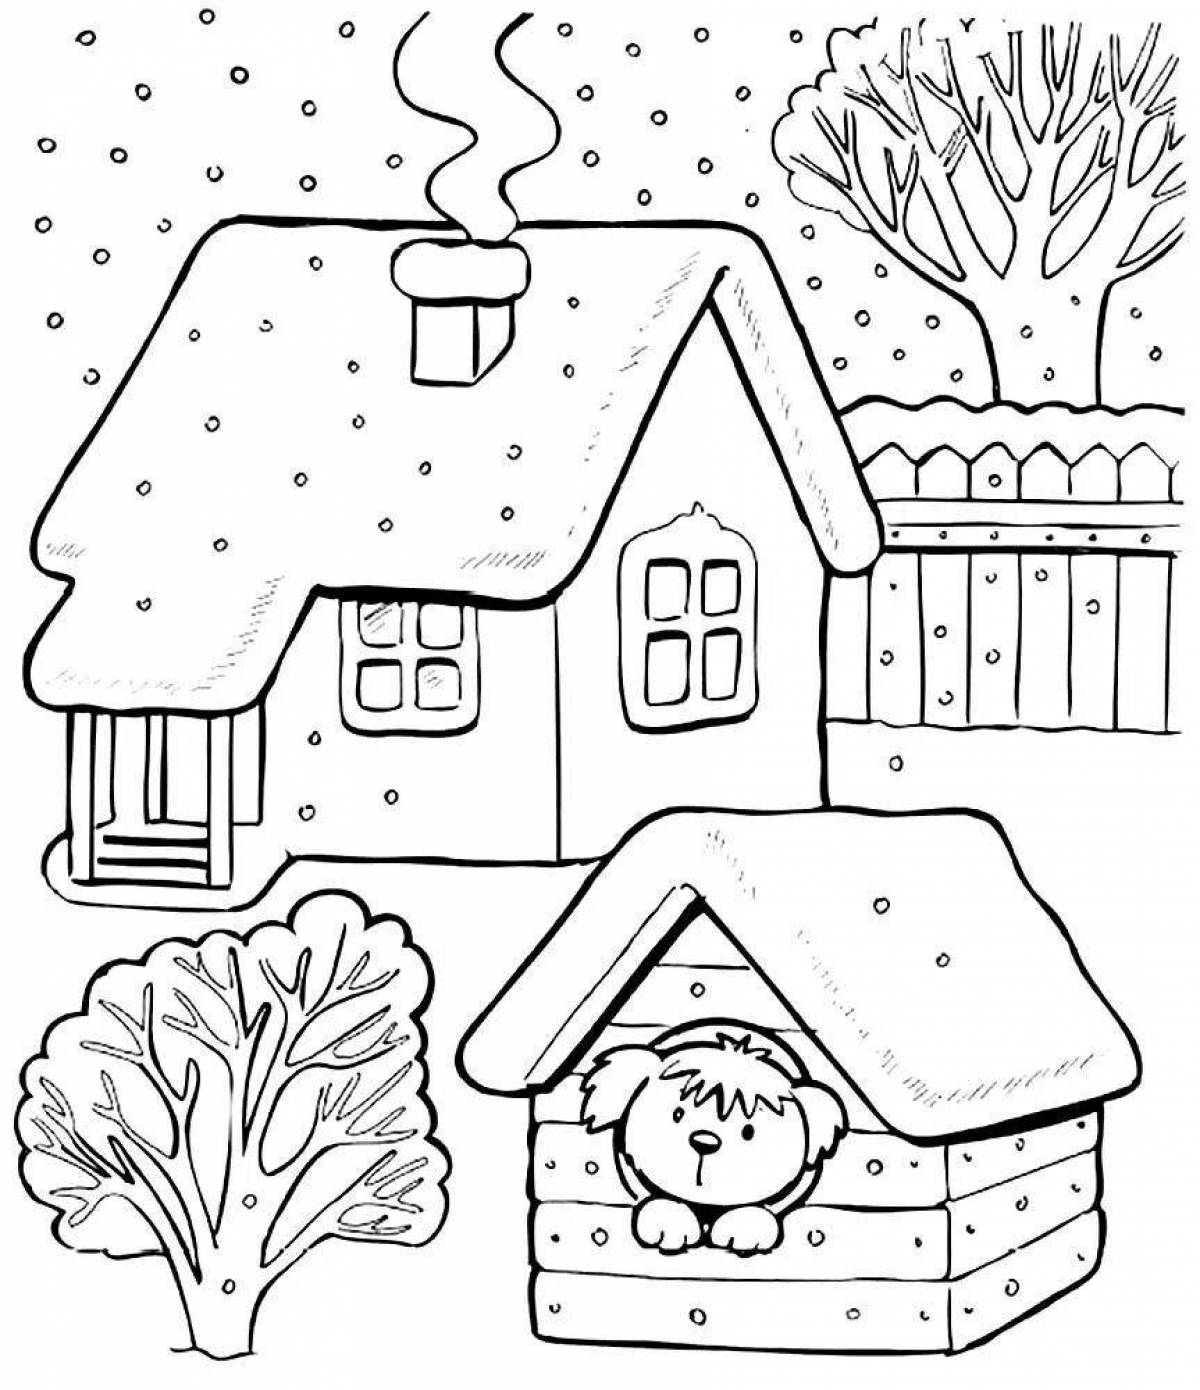 Fine house coloring book for 4-5 year olds